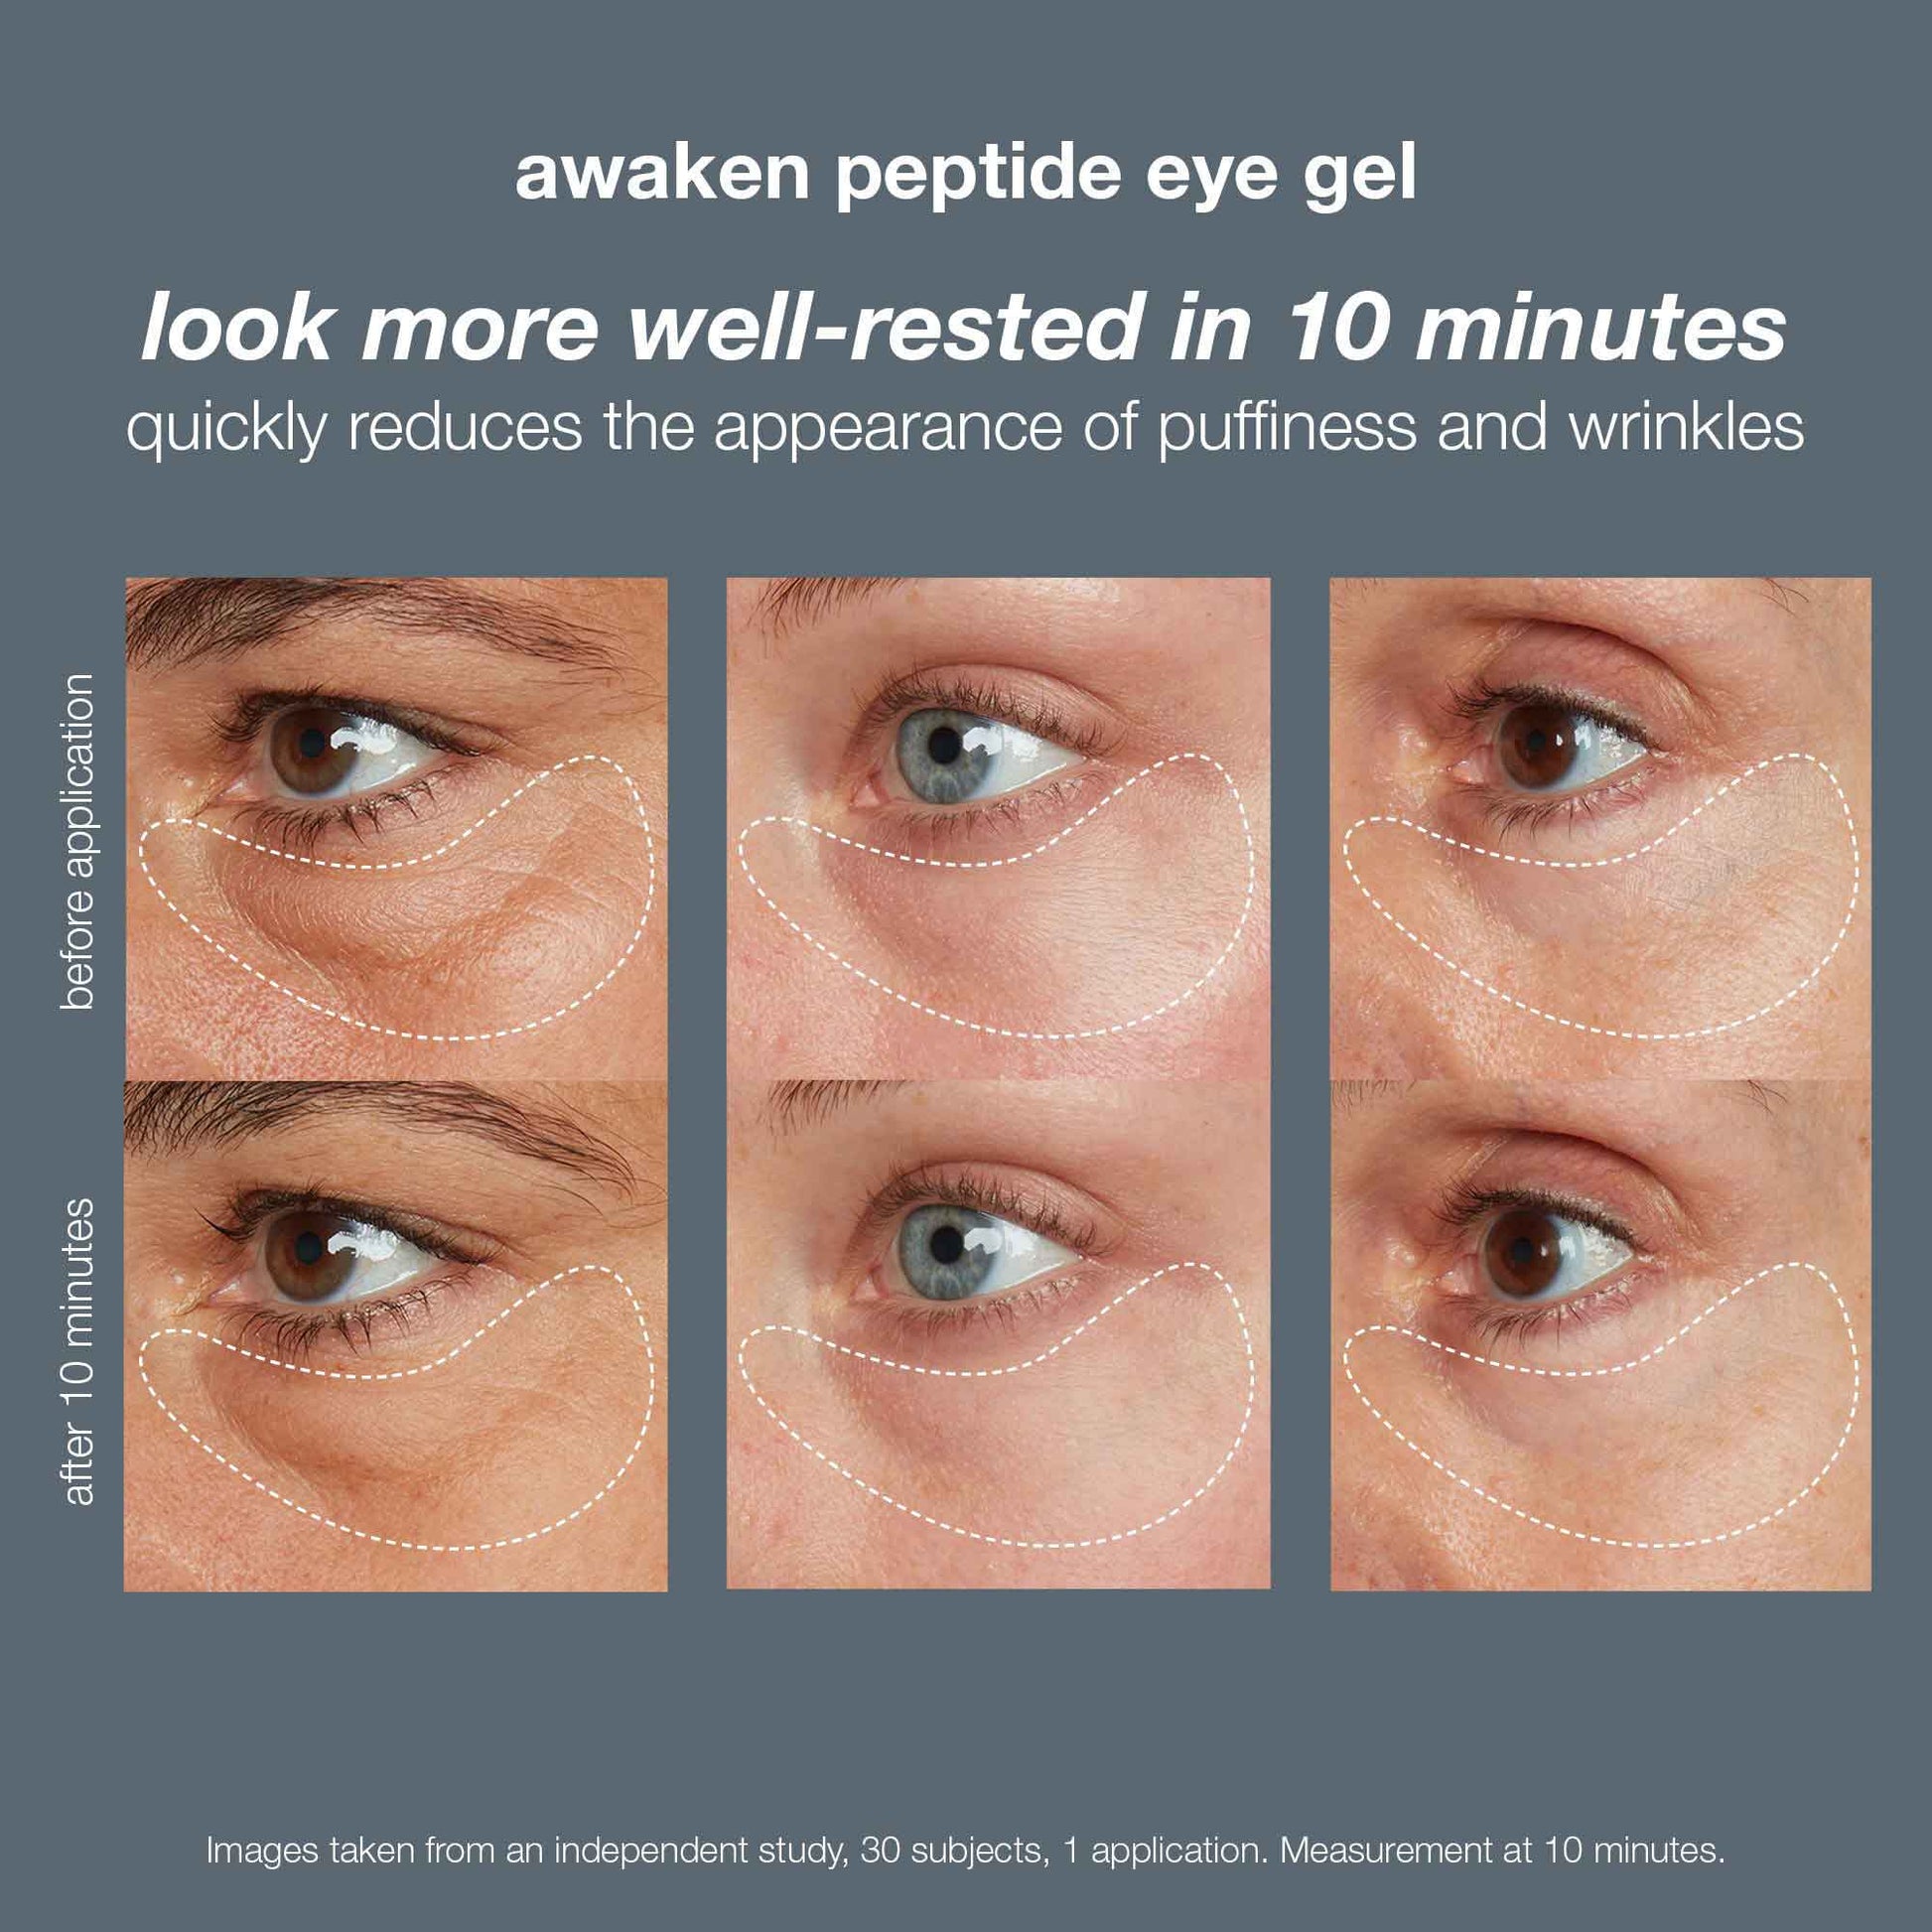 Smart second skin reduces eye bags and wrinkles – or so it seems